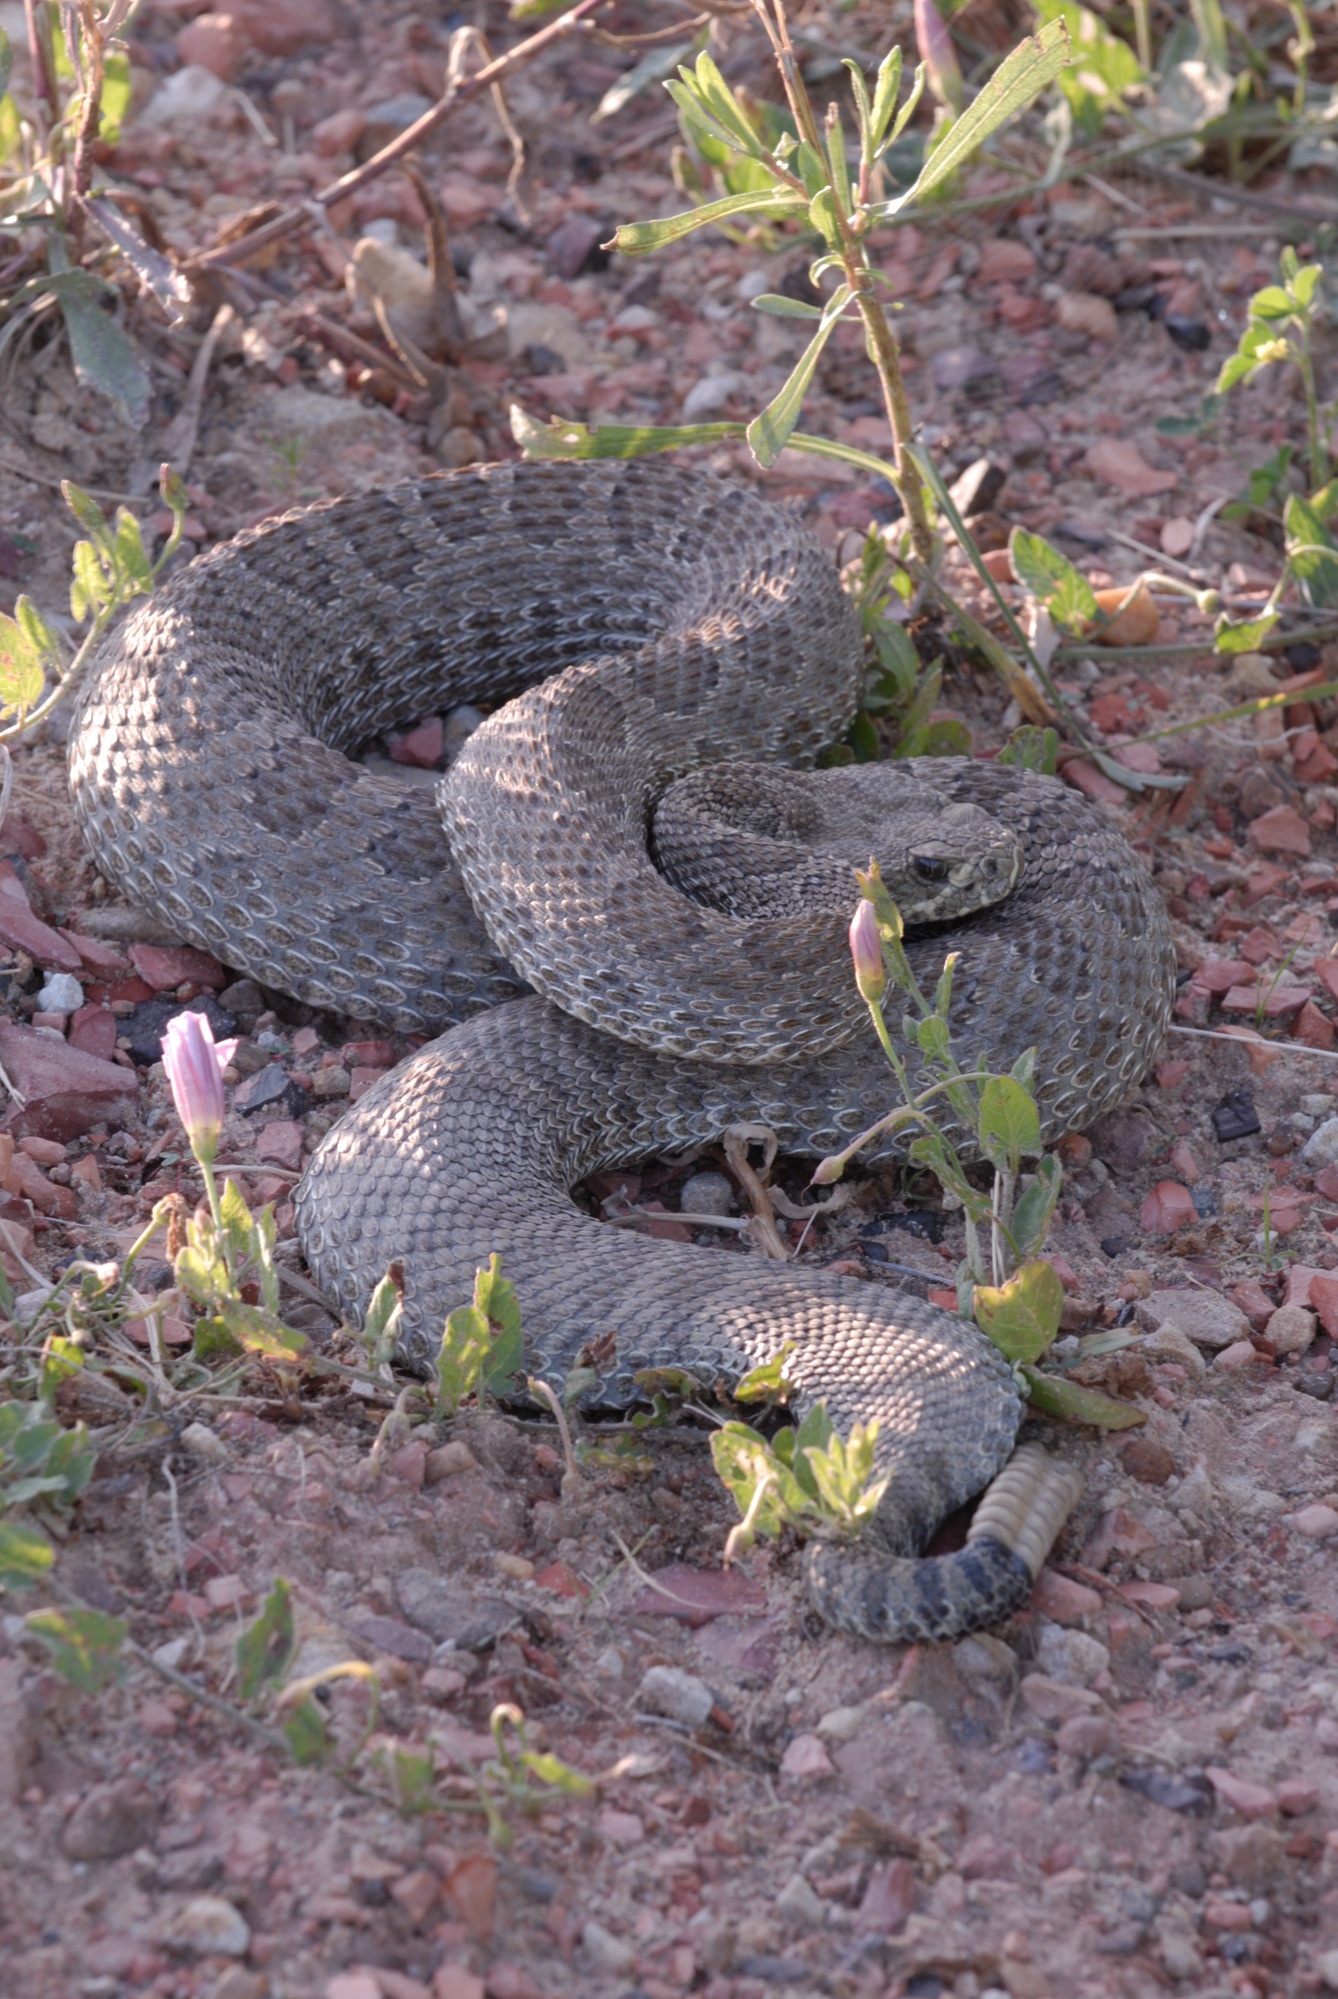 A coiled prairie rattlesnake lies curled on the ground, with flowering plants visible around it. 